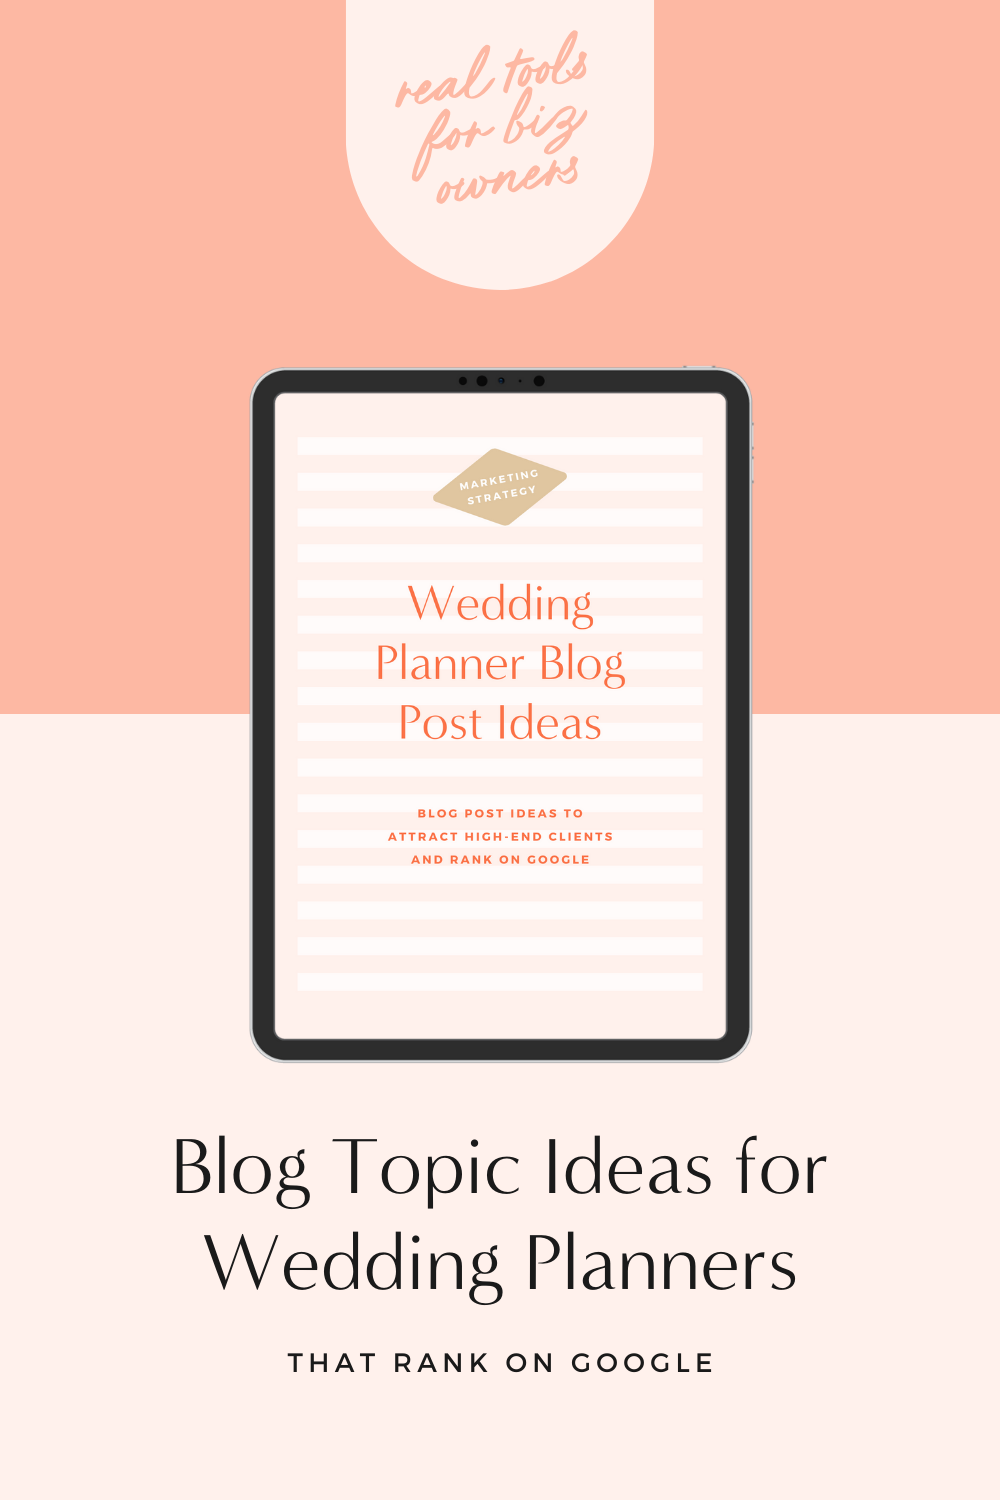 Transform your blog with our free downloadable guide featuring 10 optimal wedding planner blog topics. These carefully curated ideas aim to help your blog rank high on Google and appeal to your perfect clientele. Don't miss out on this opportunity to turn your passion for wedding planning into a magnet for attracting your ideal clients!